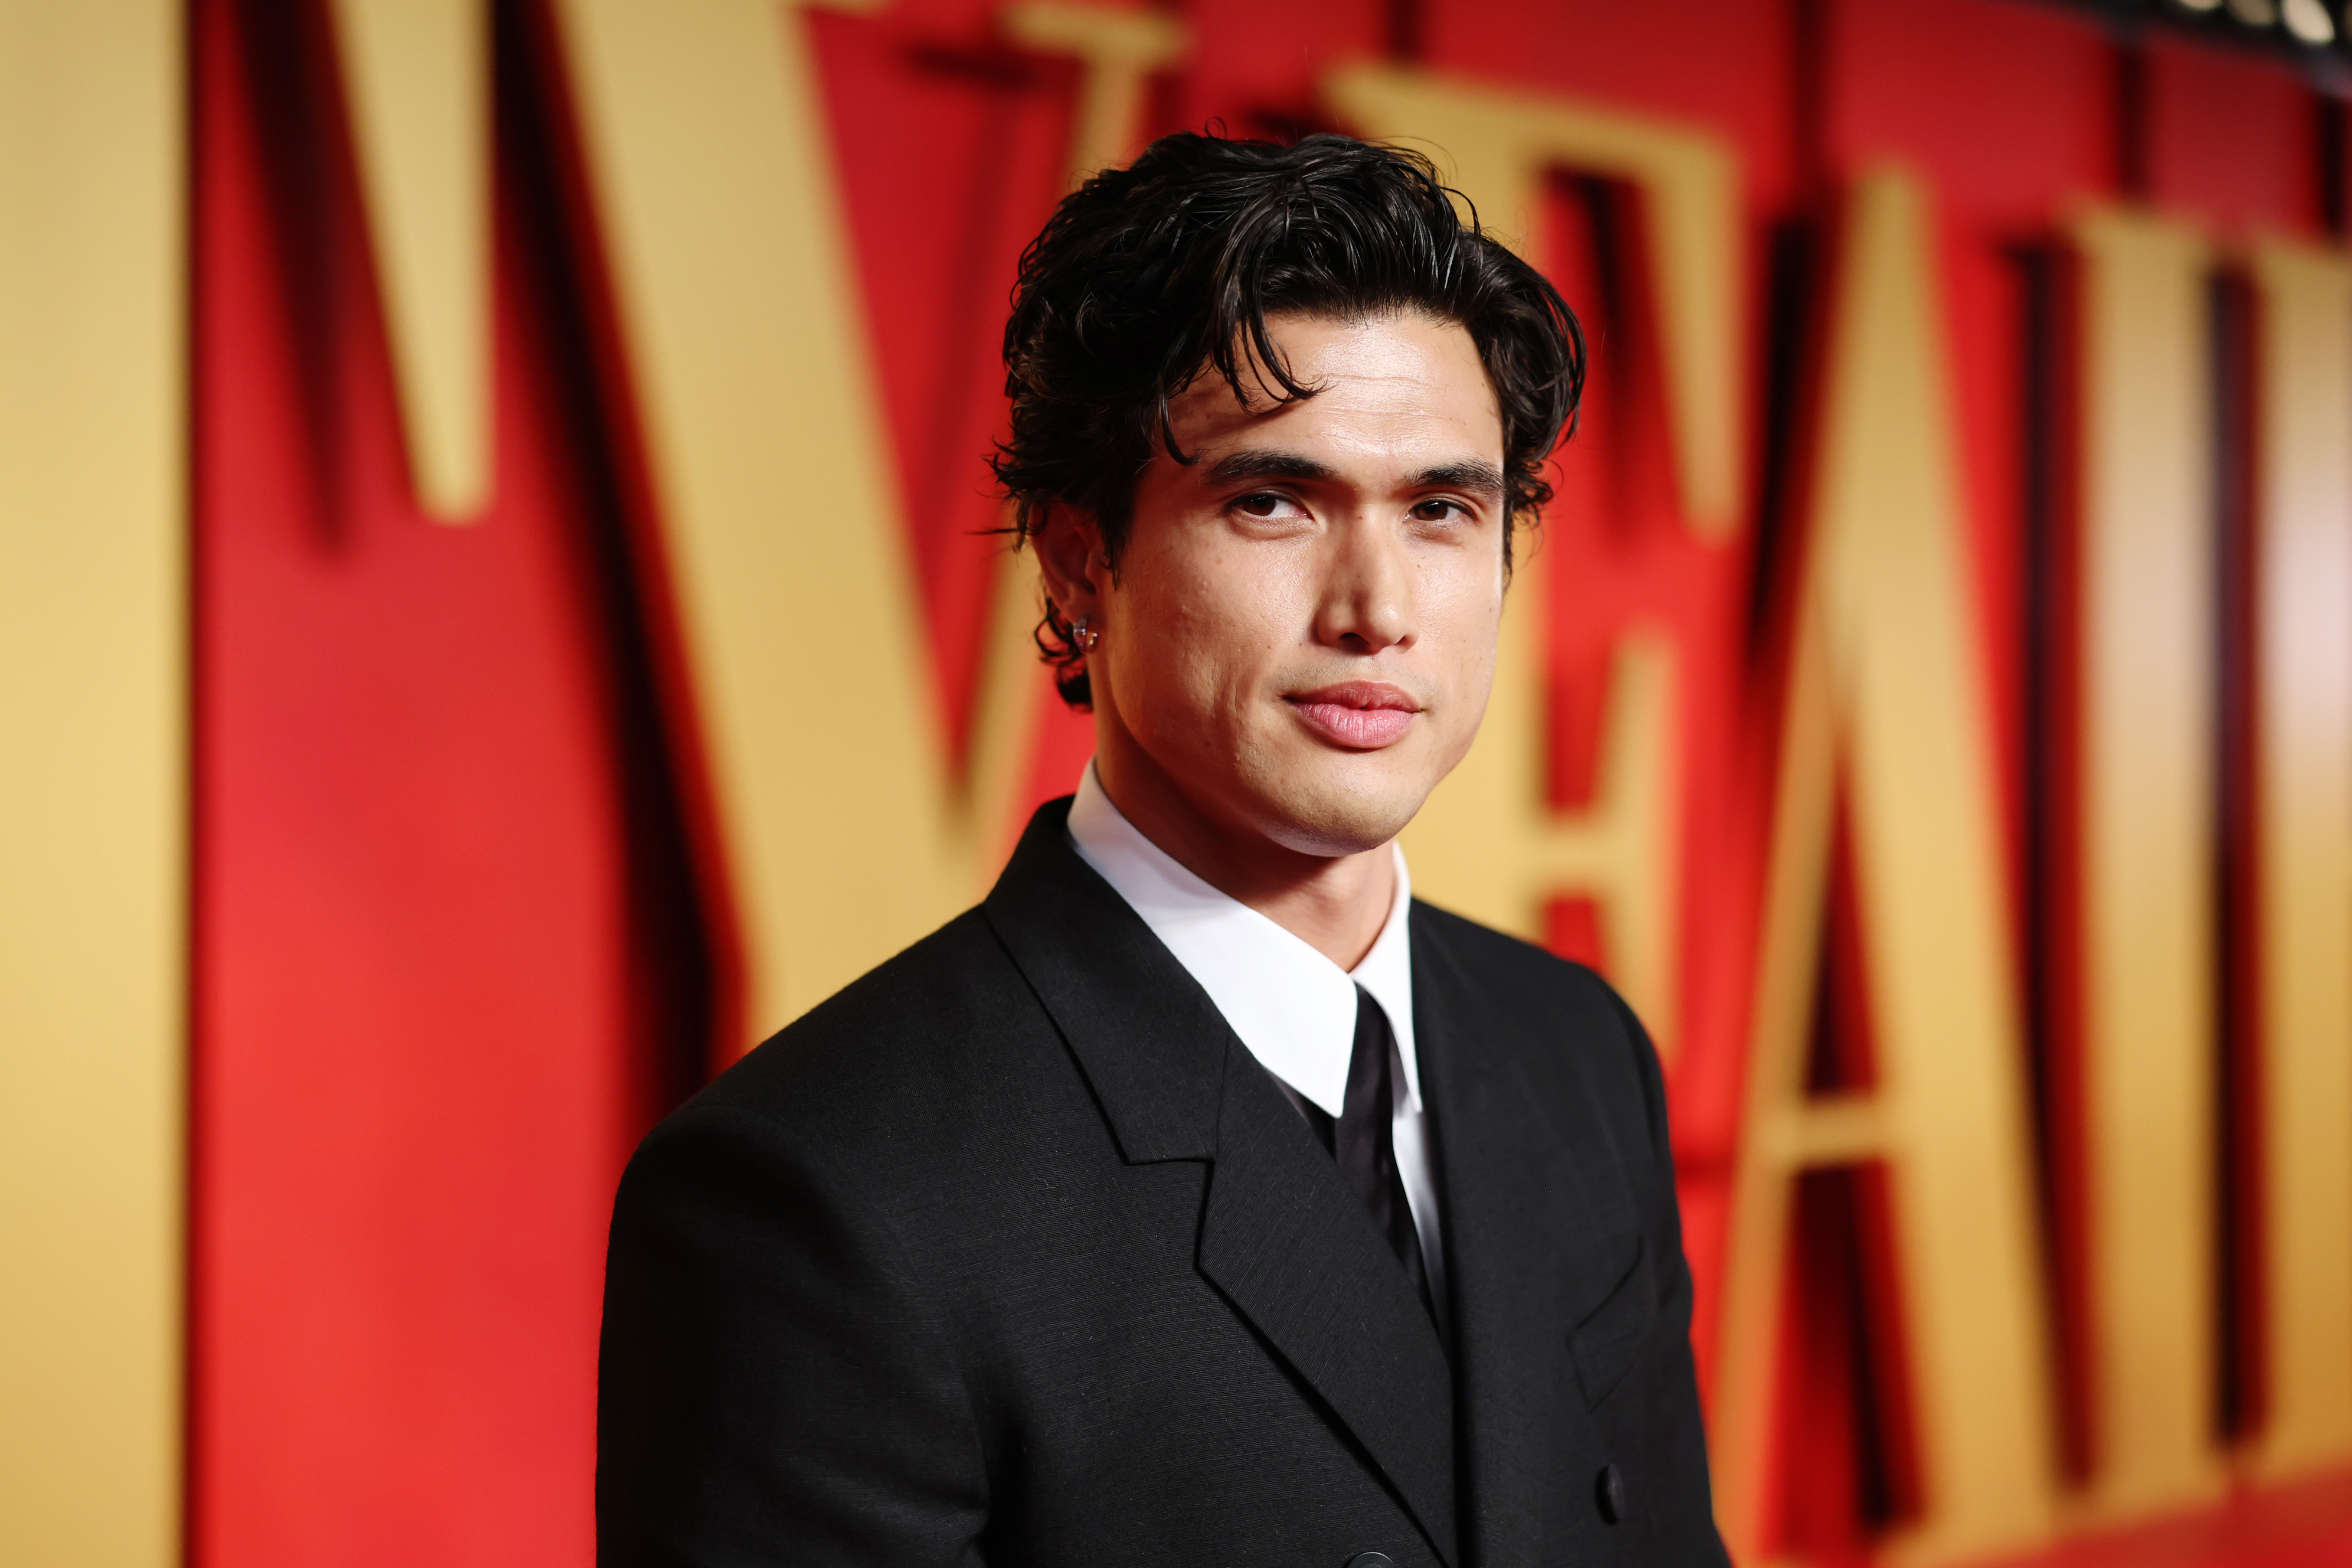 Charles Melton in a formal black suit posing before a backdrop with bold letters